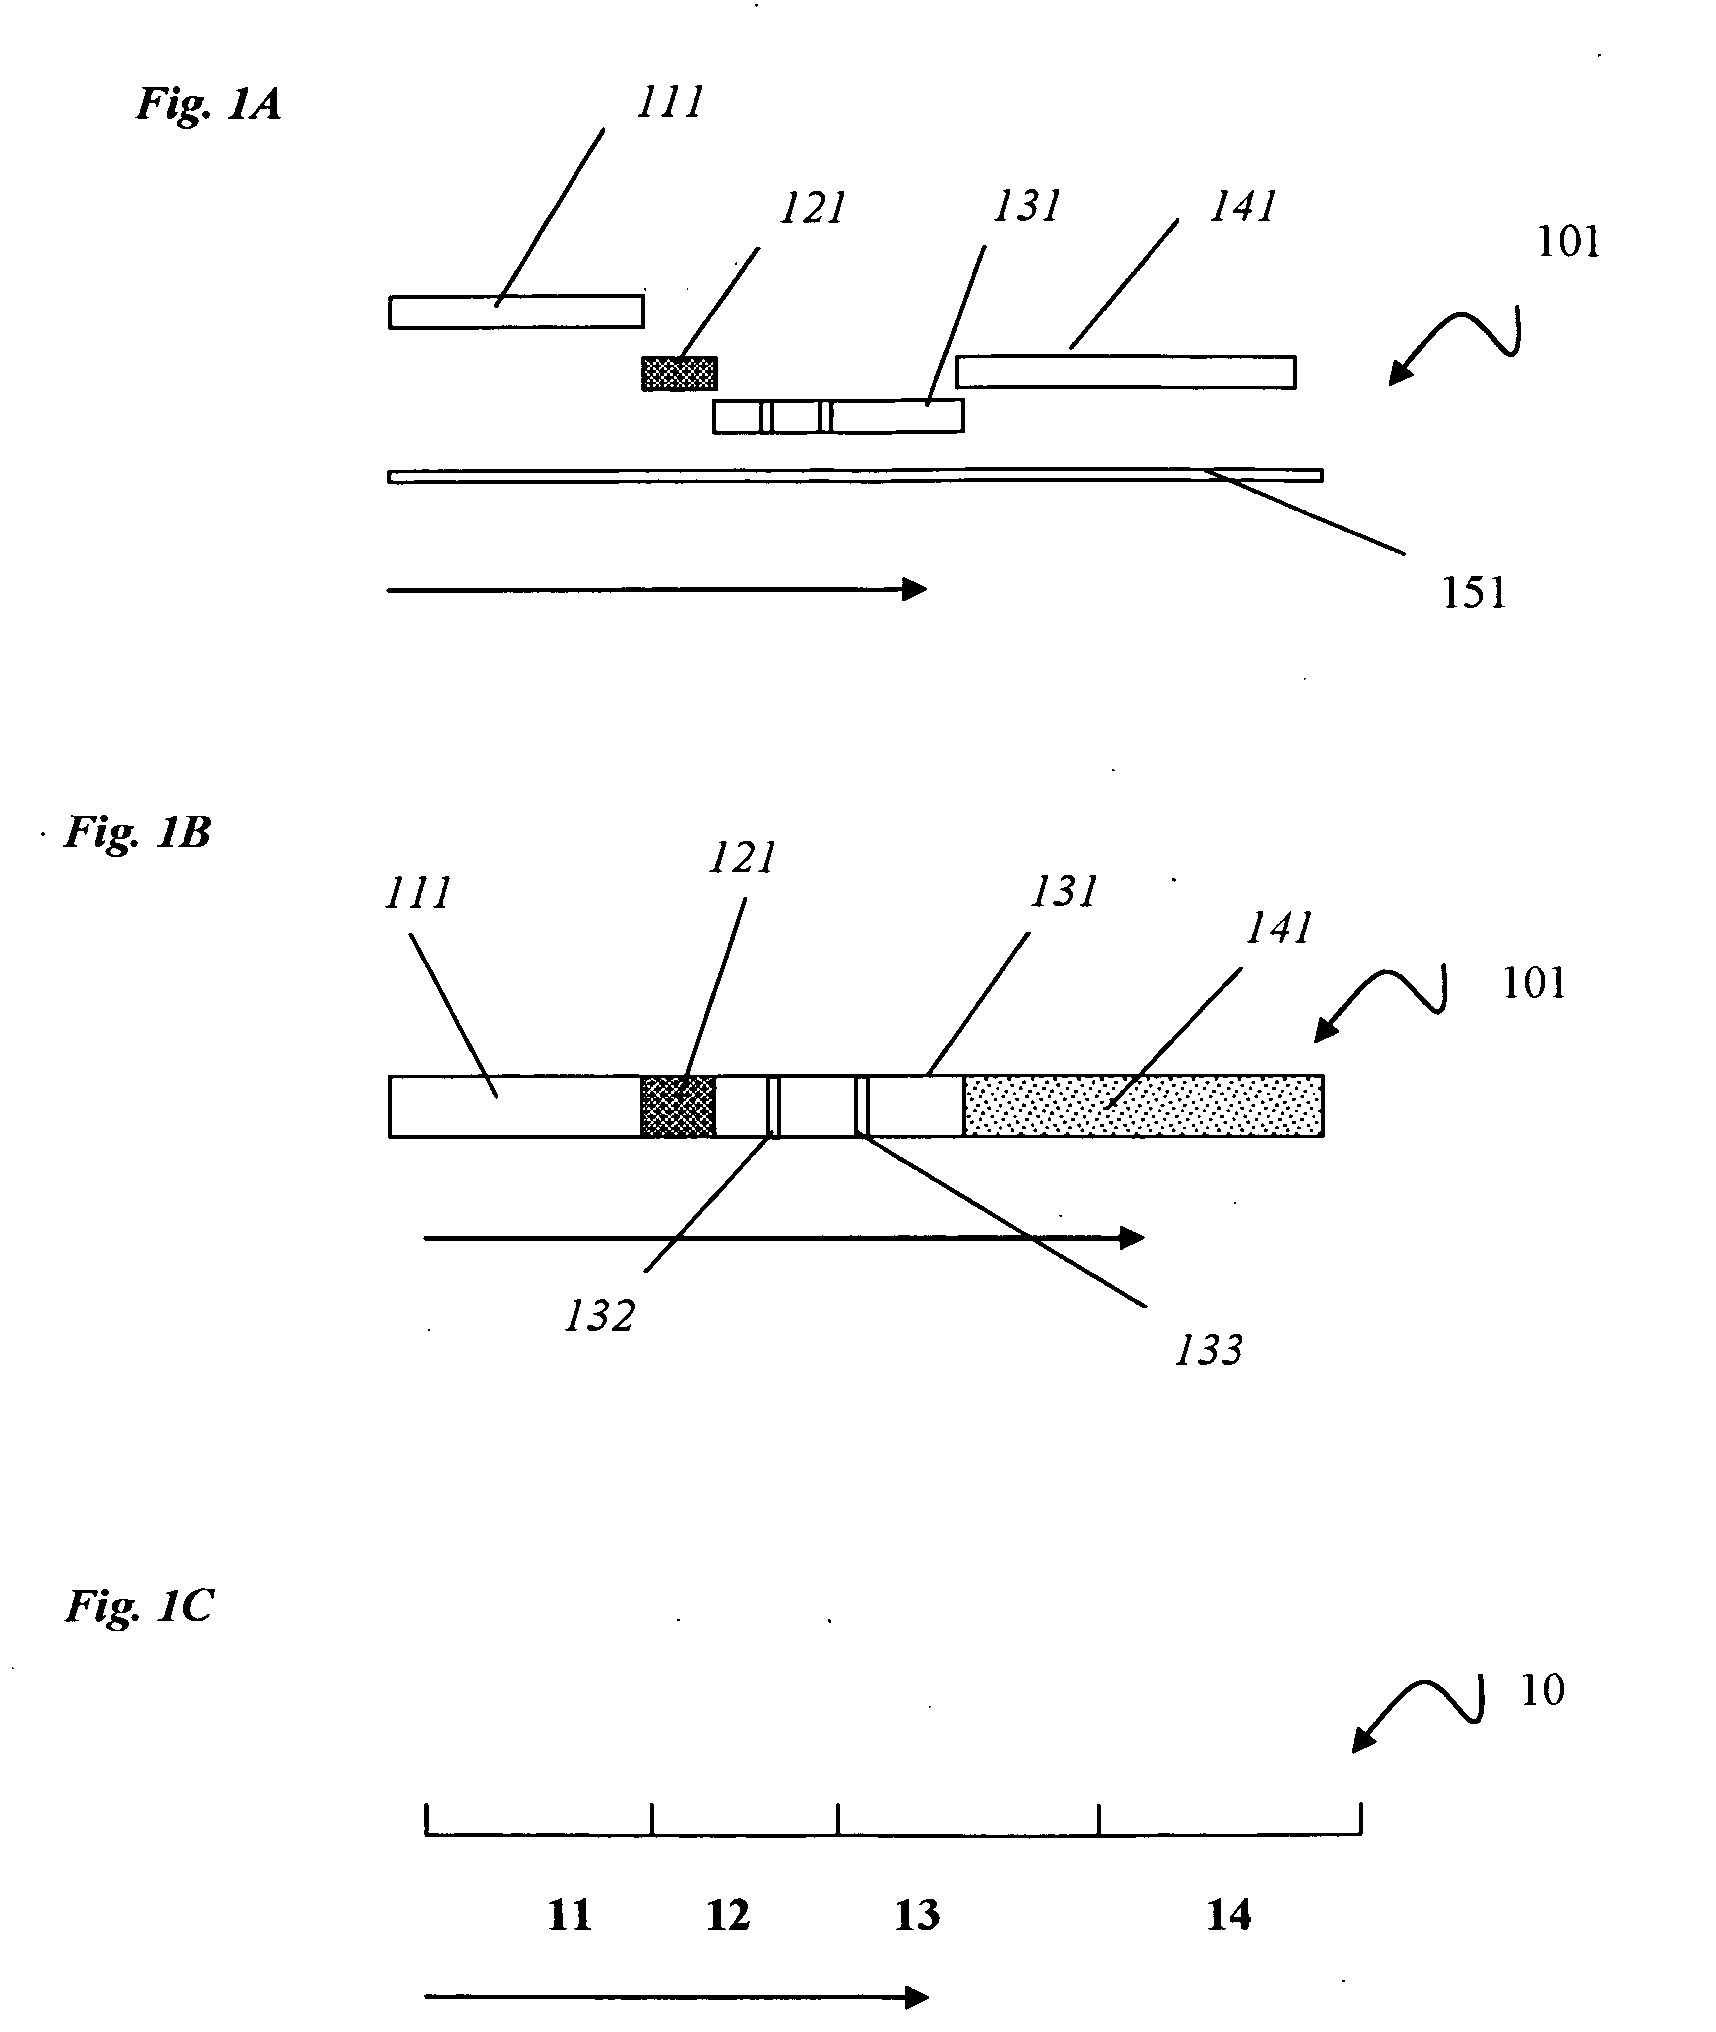 Test device for detecting an analyte in a liquid sample